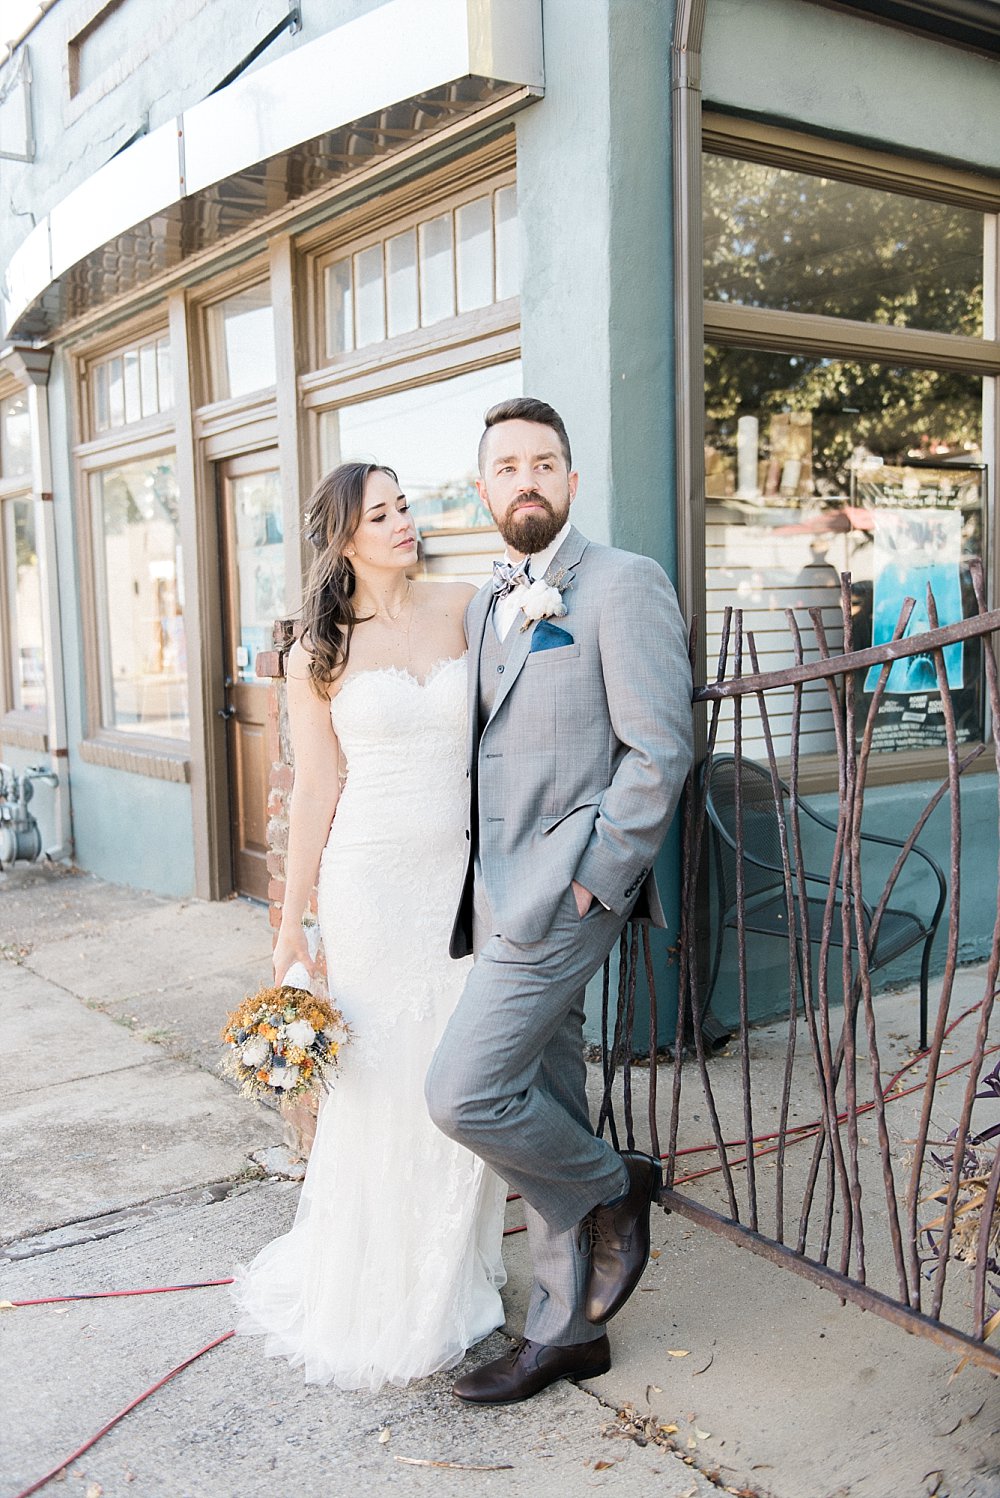 Relix Variety Theatre Wedding | Knoxville Wedding | Knoxville Wedding Photographer